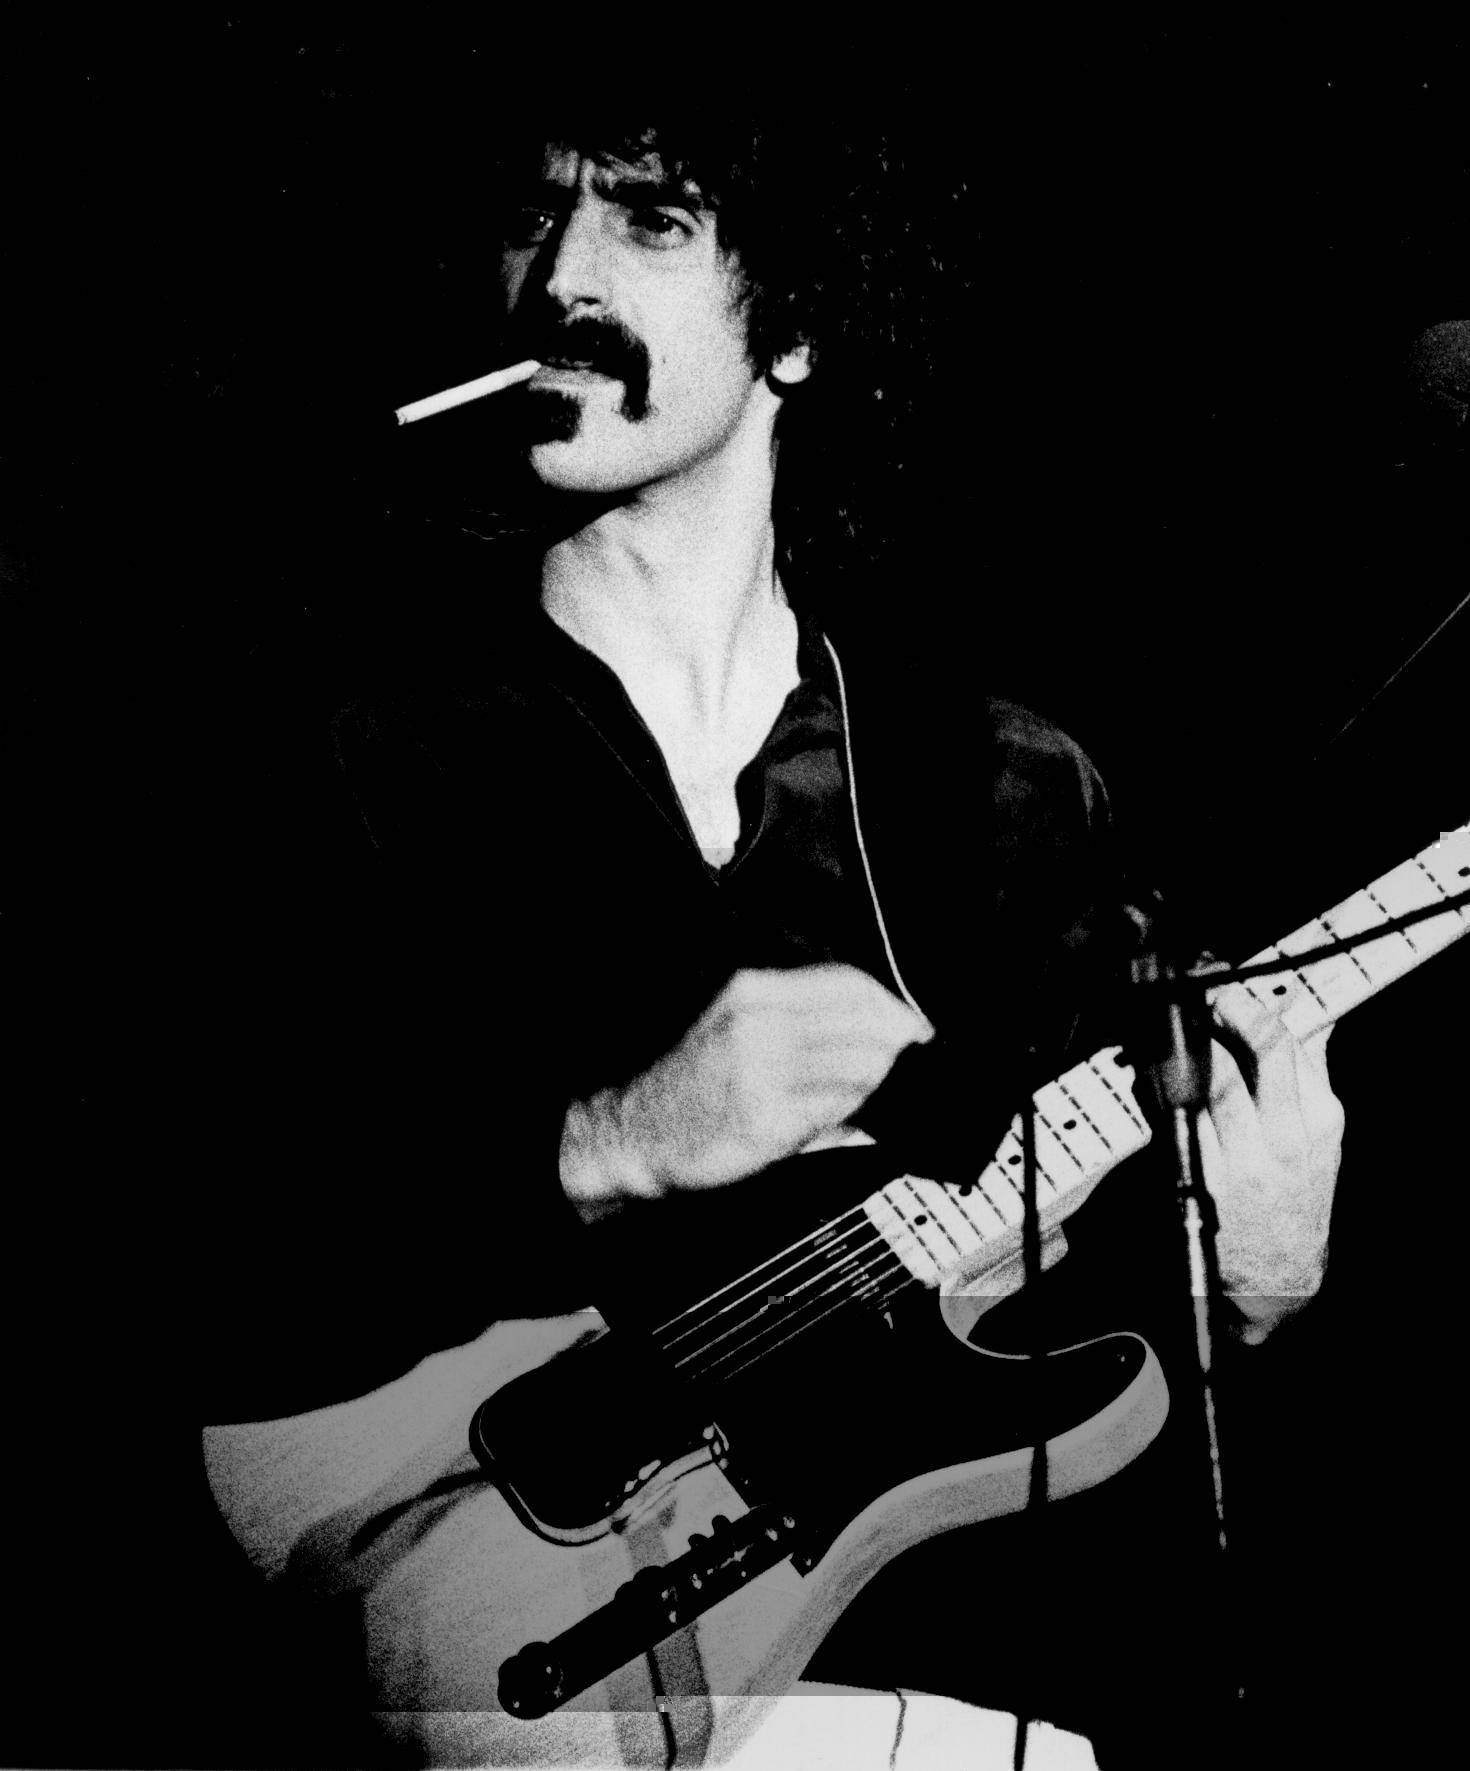 The iconic musician Frank Zappa rocking on stage Wallpaper